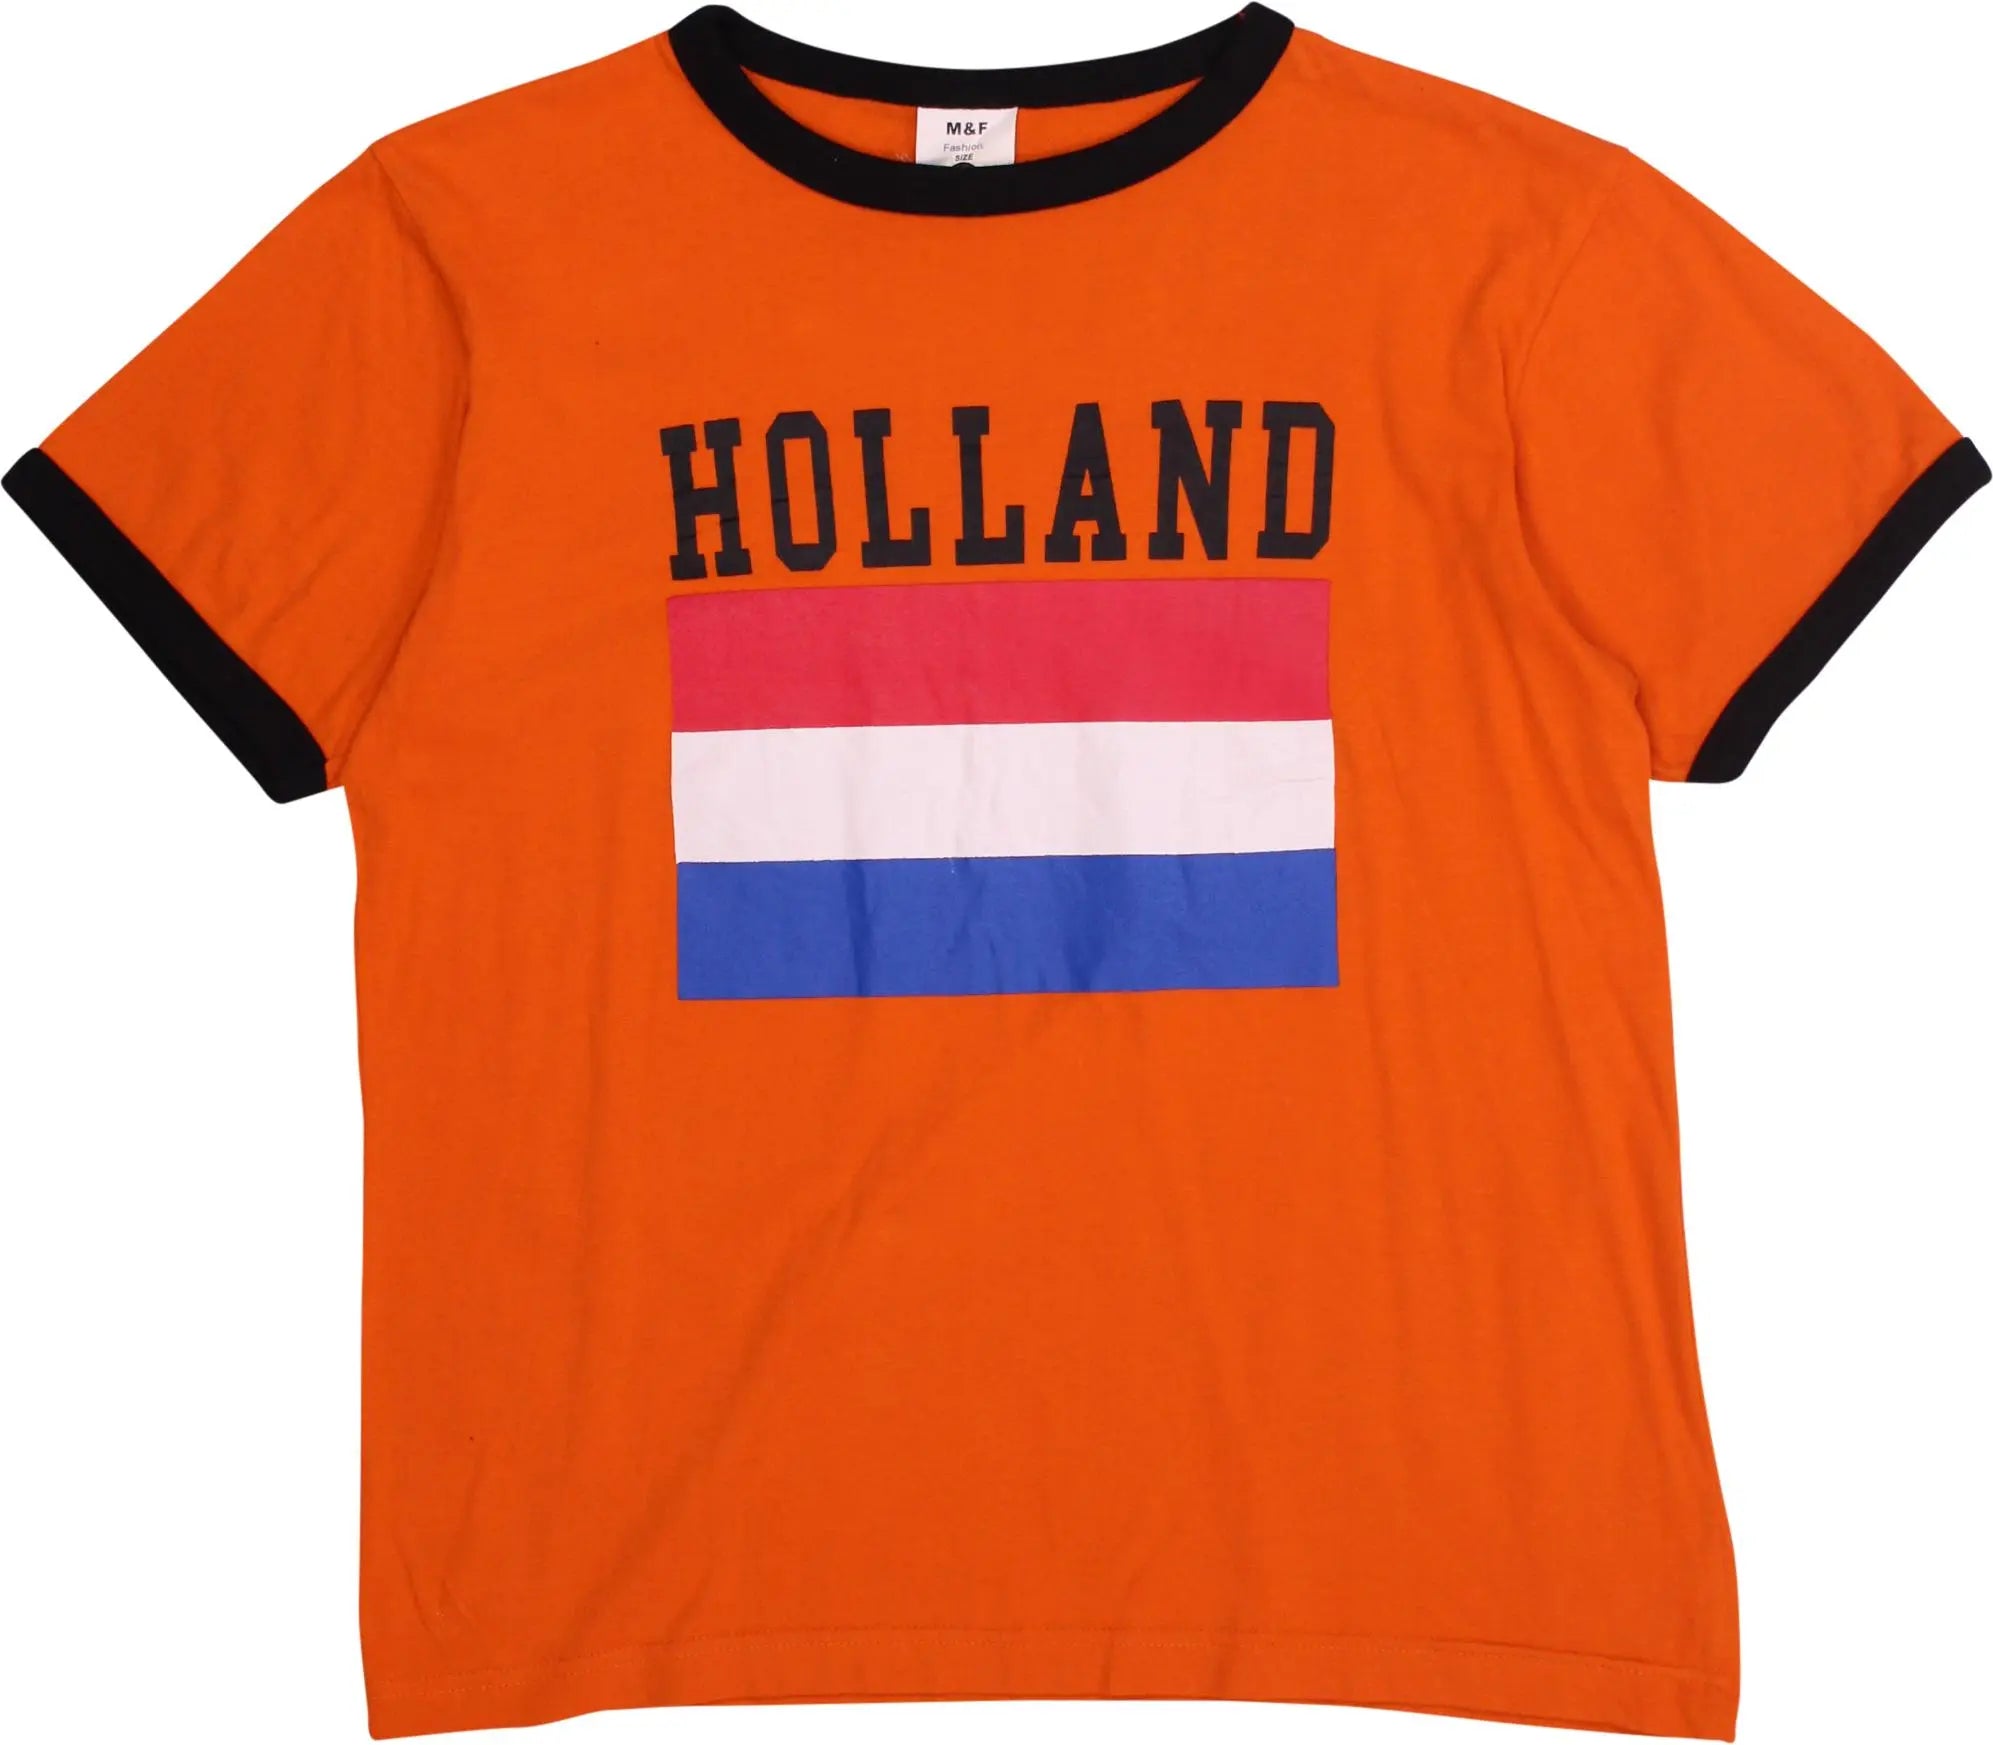 M&F - T-Shirt with Holland Print- ThriftTale.com - Vintage and second handclothing